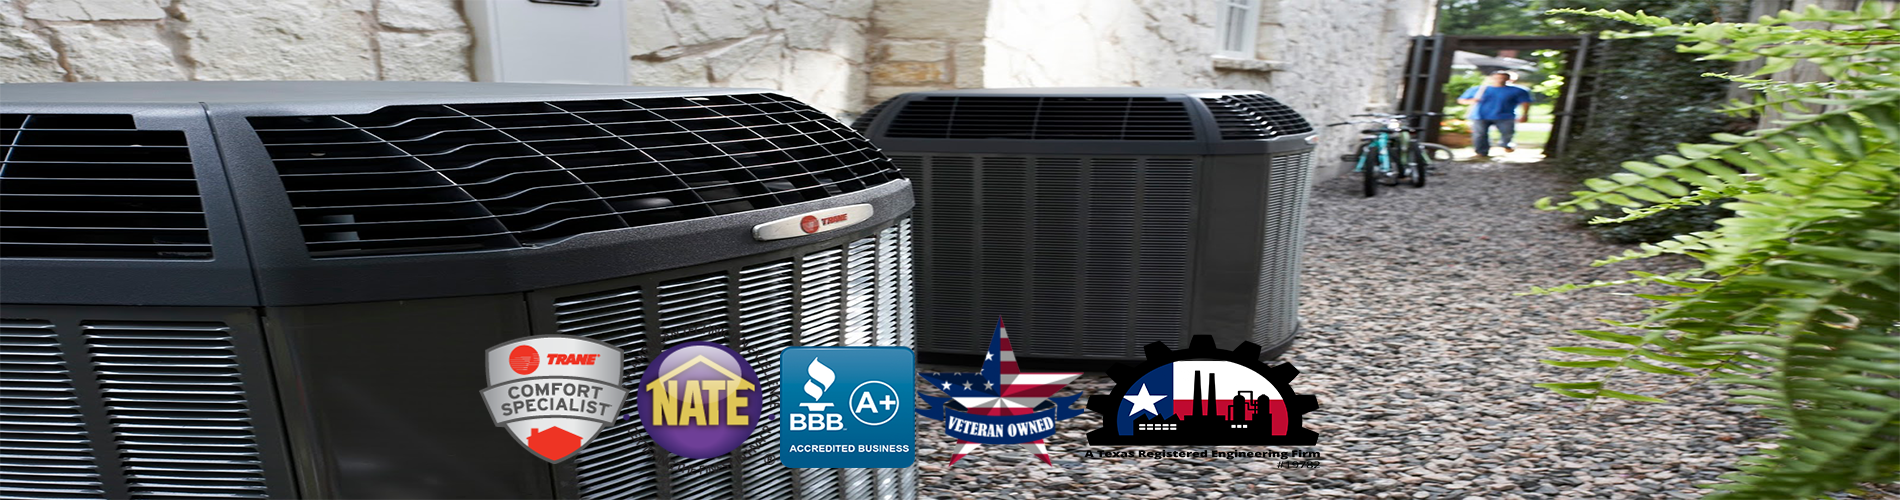 The Woodlands Heating Air Conditioning Repair & Installation - Comfort King Photo